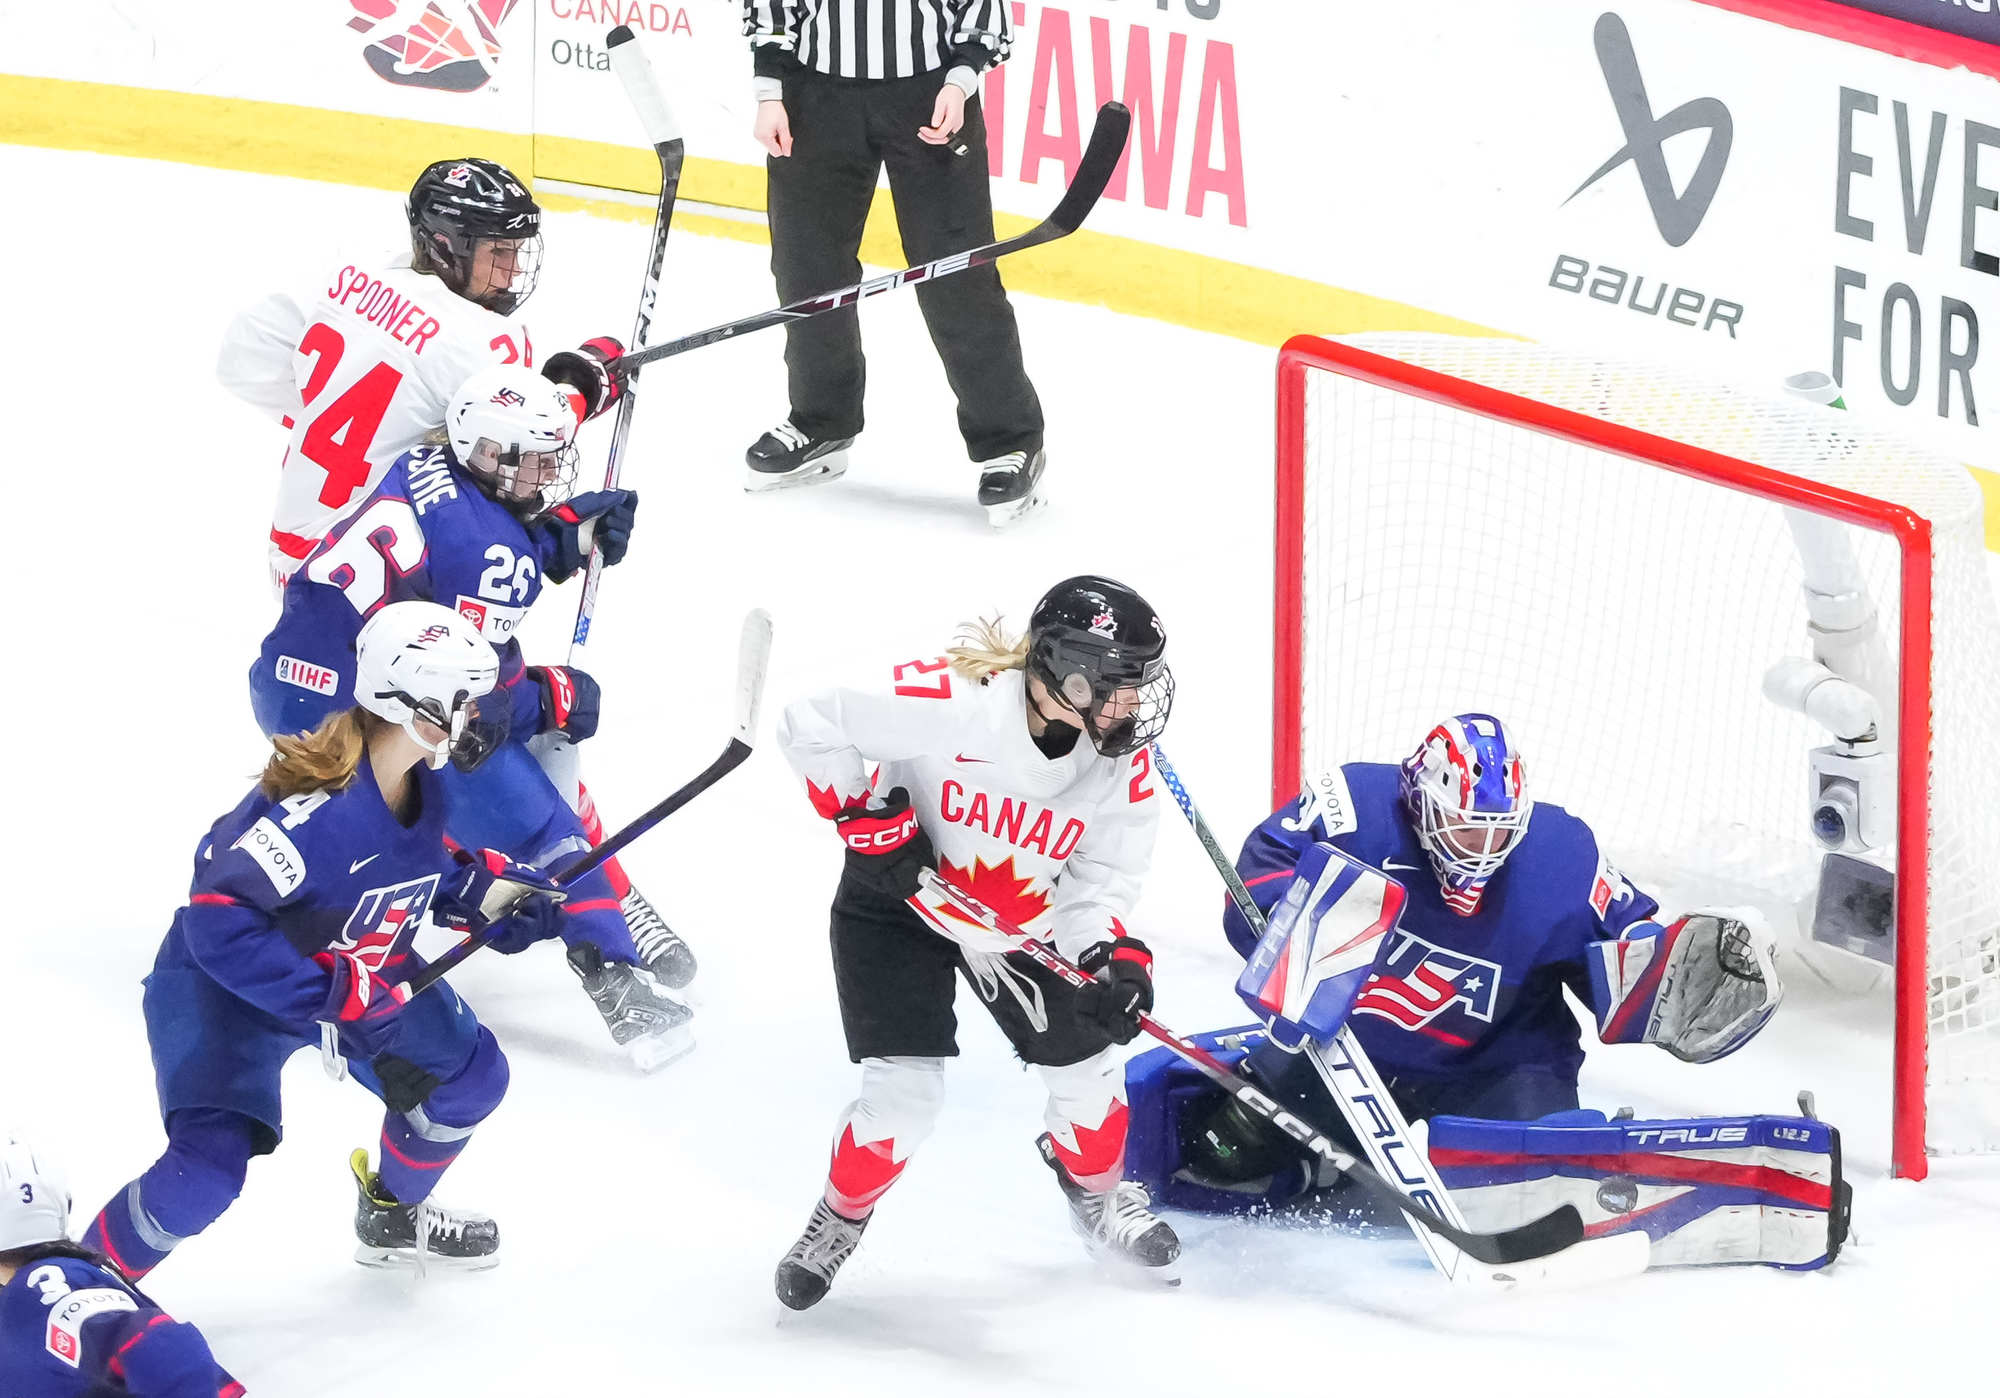 Canada Wins Fourth Consecutive Women’s World Championship Gold in Overtime Thriller